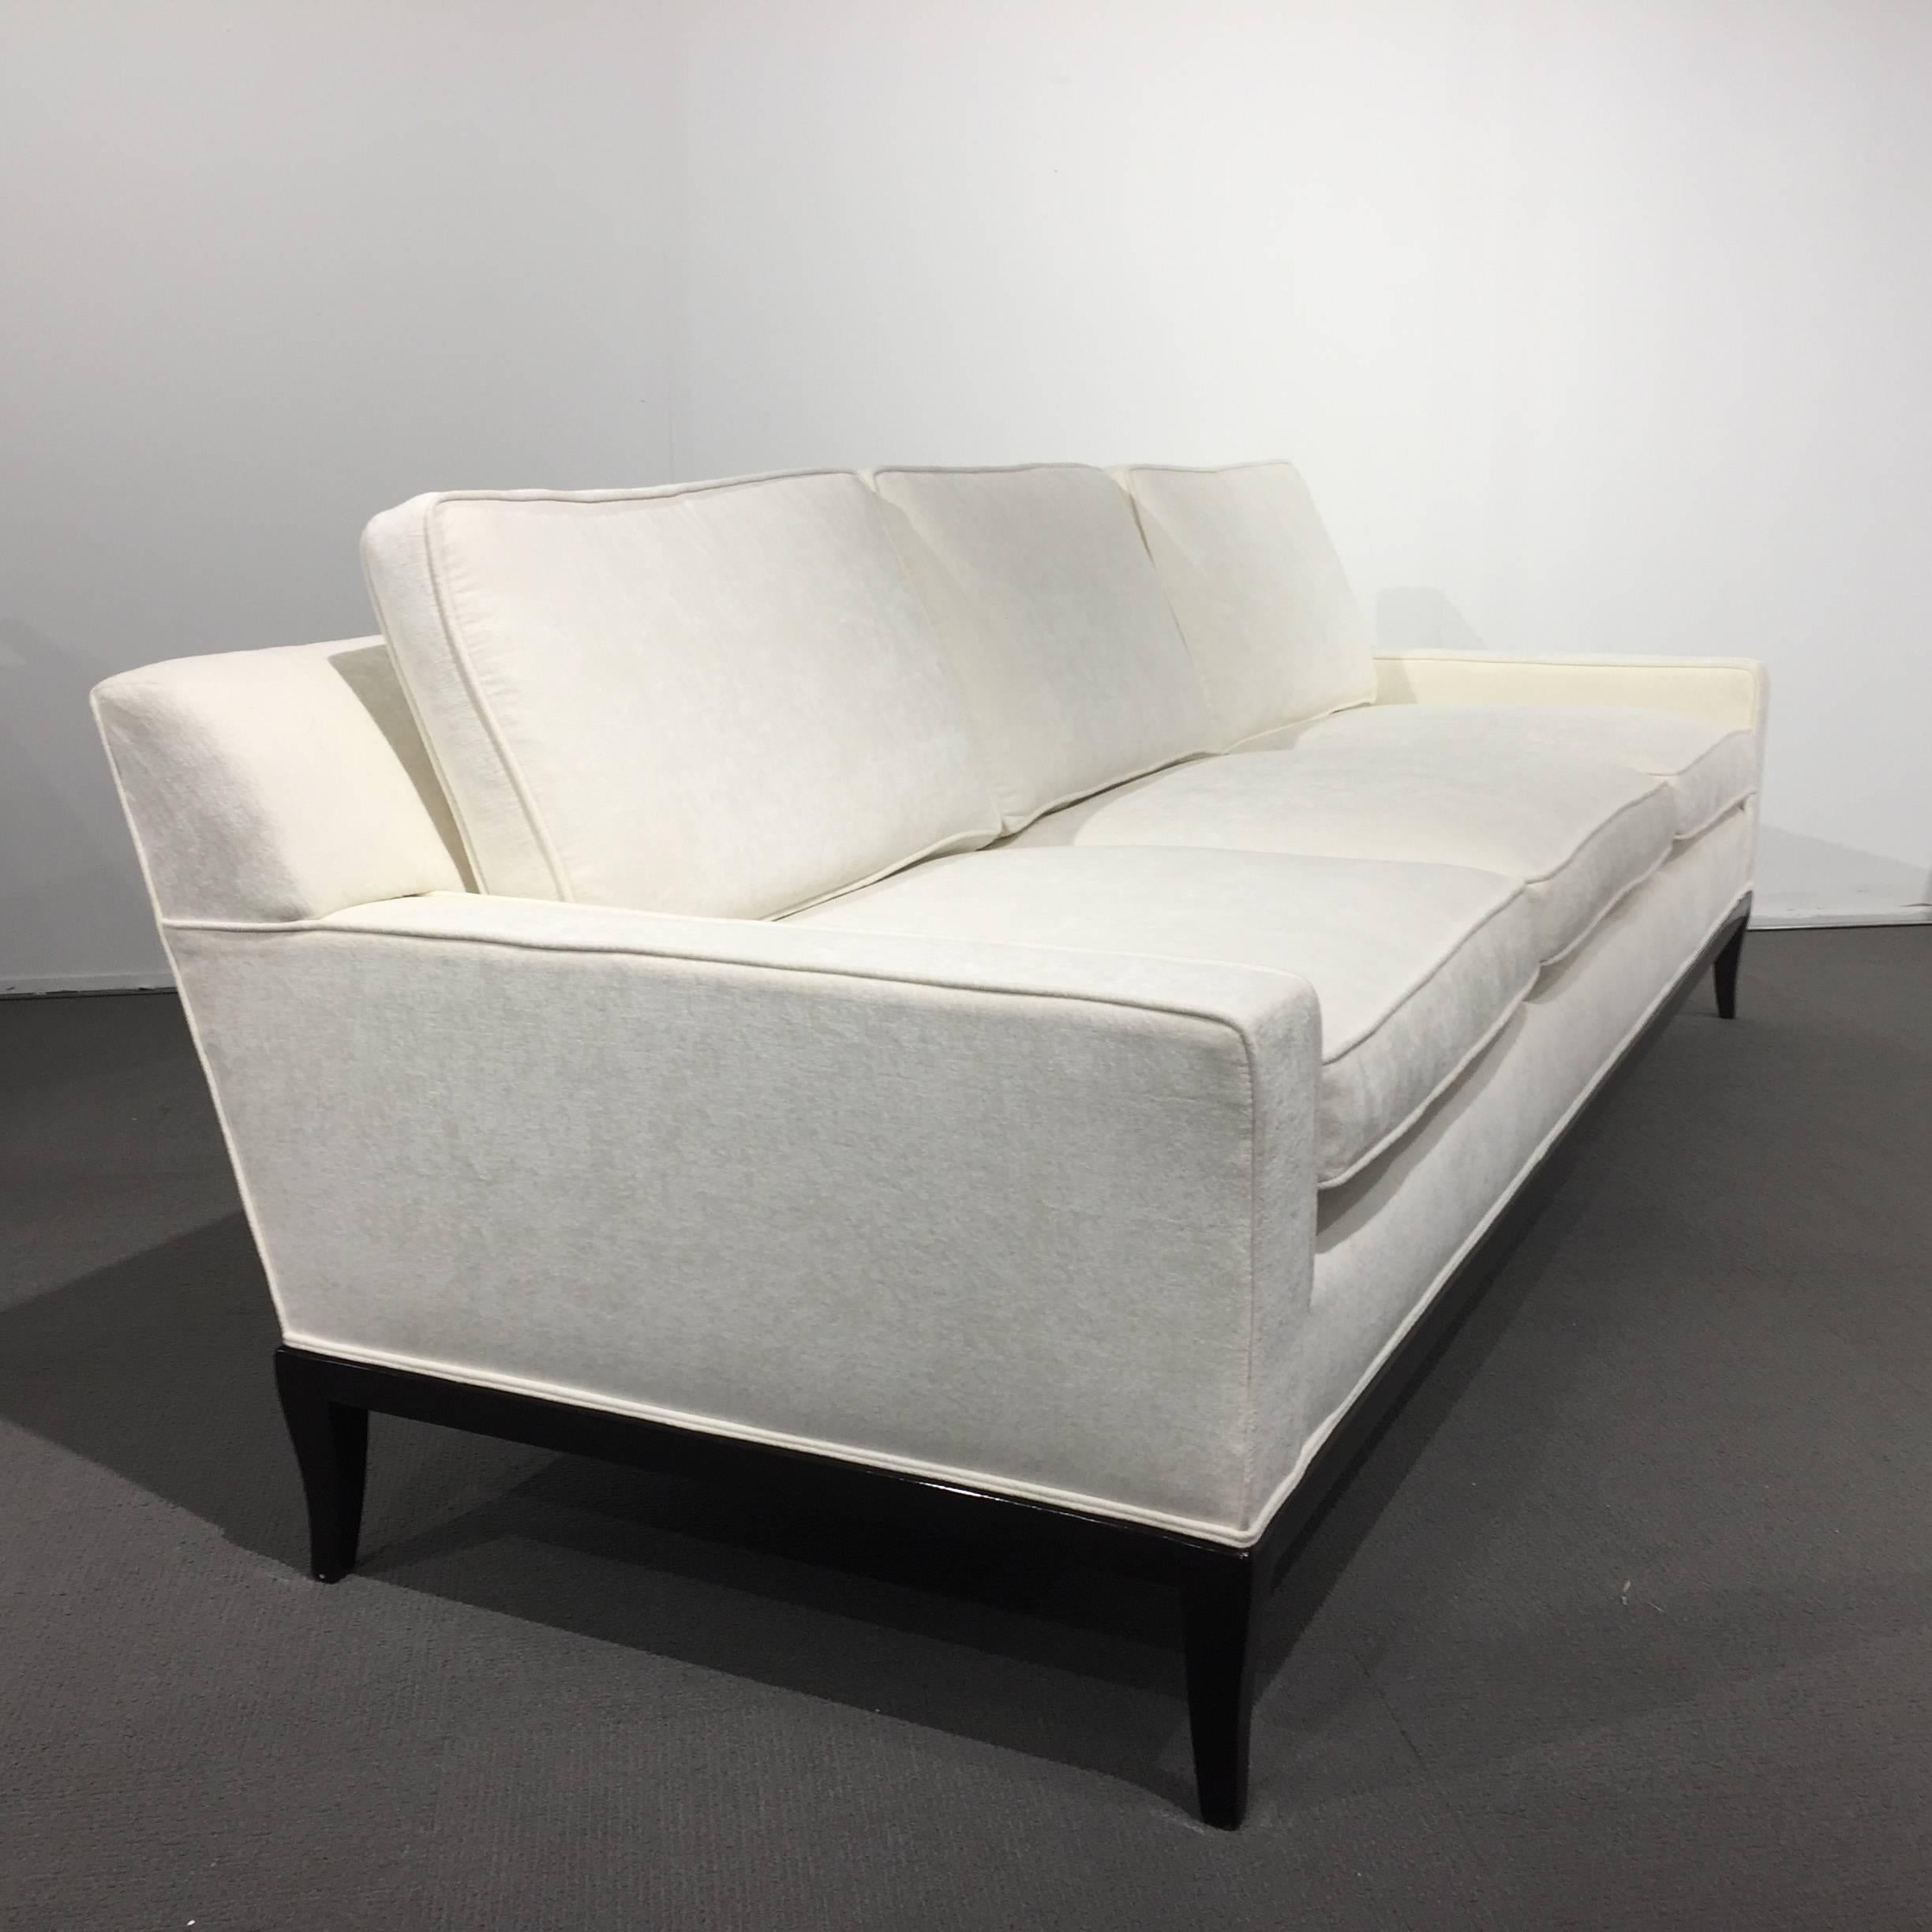 Tommi Parzinger, Parzinger original custom sofa , from Parzingers accountant , in off-white chenille and dark walnut legs.